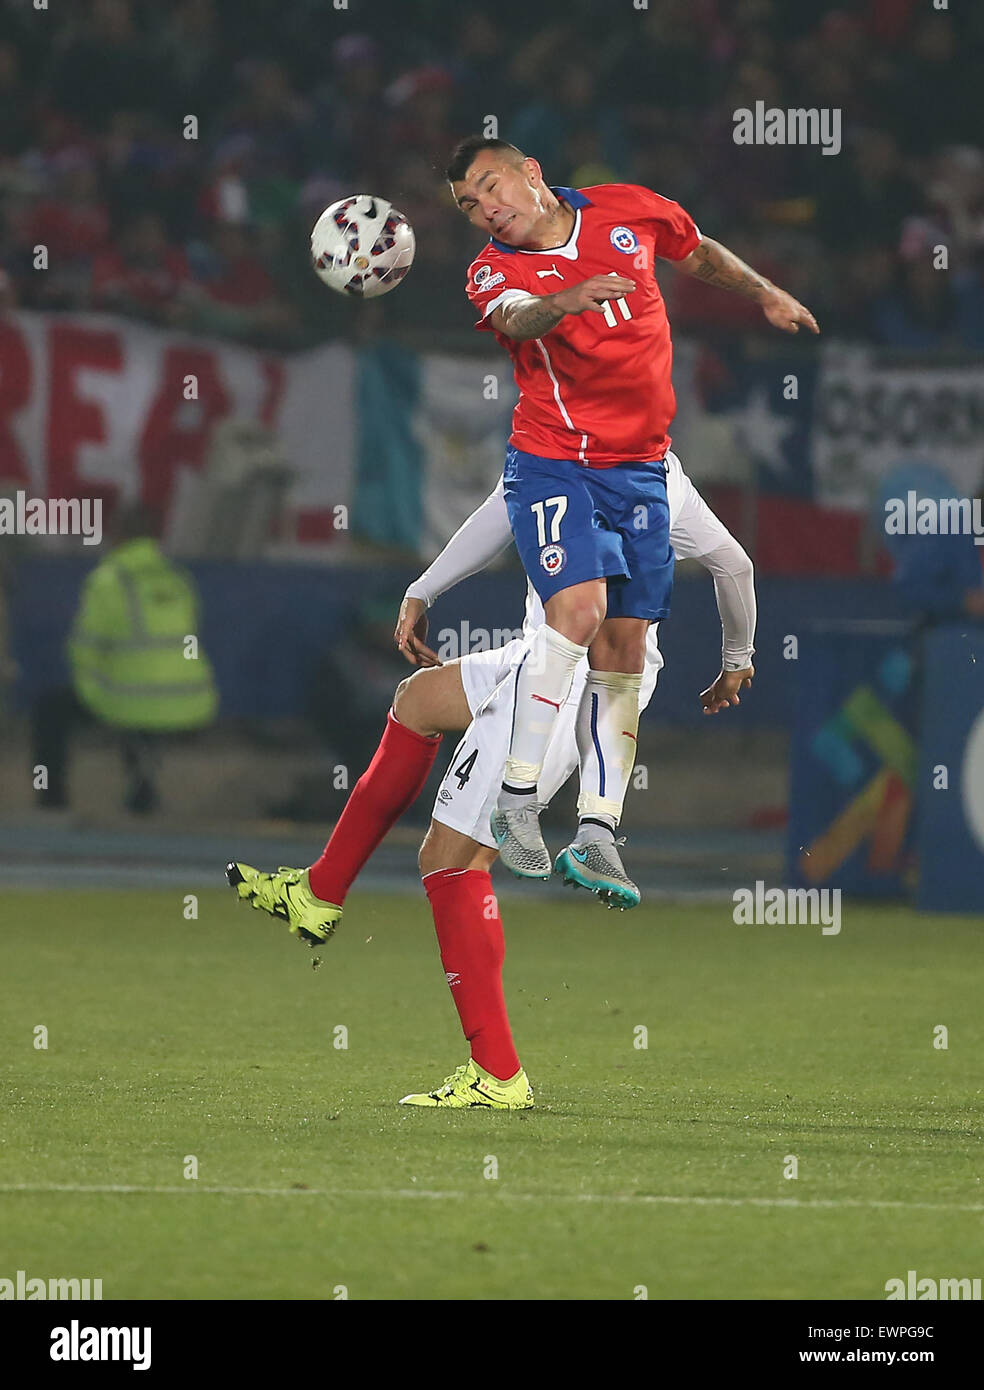 Santiago, Chile. 29th June, 2015. Chile's Gary Medel (top) competes for a header during a semi-final match between Chile and Peru of 2015 American Cup in Santiago, capital of Chile, June 29, 2015. Chile defeated Peru 2-1. Credit:  Xu Zijian/Xinhua/Alamy Live News Stock Photo